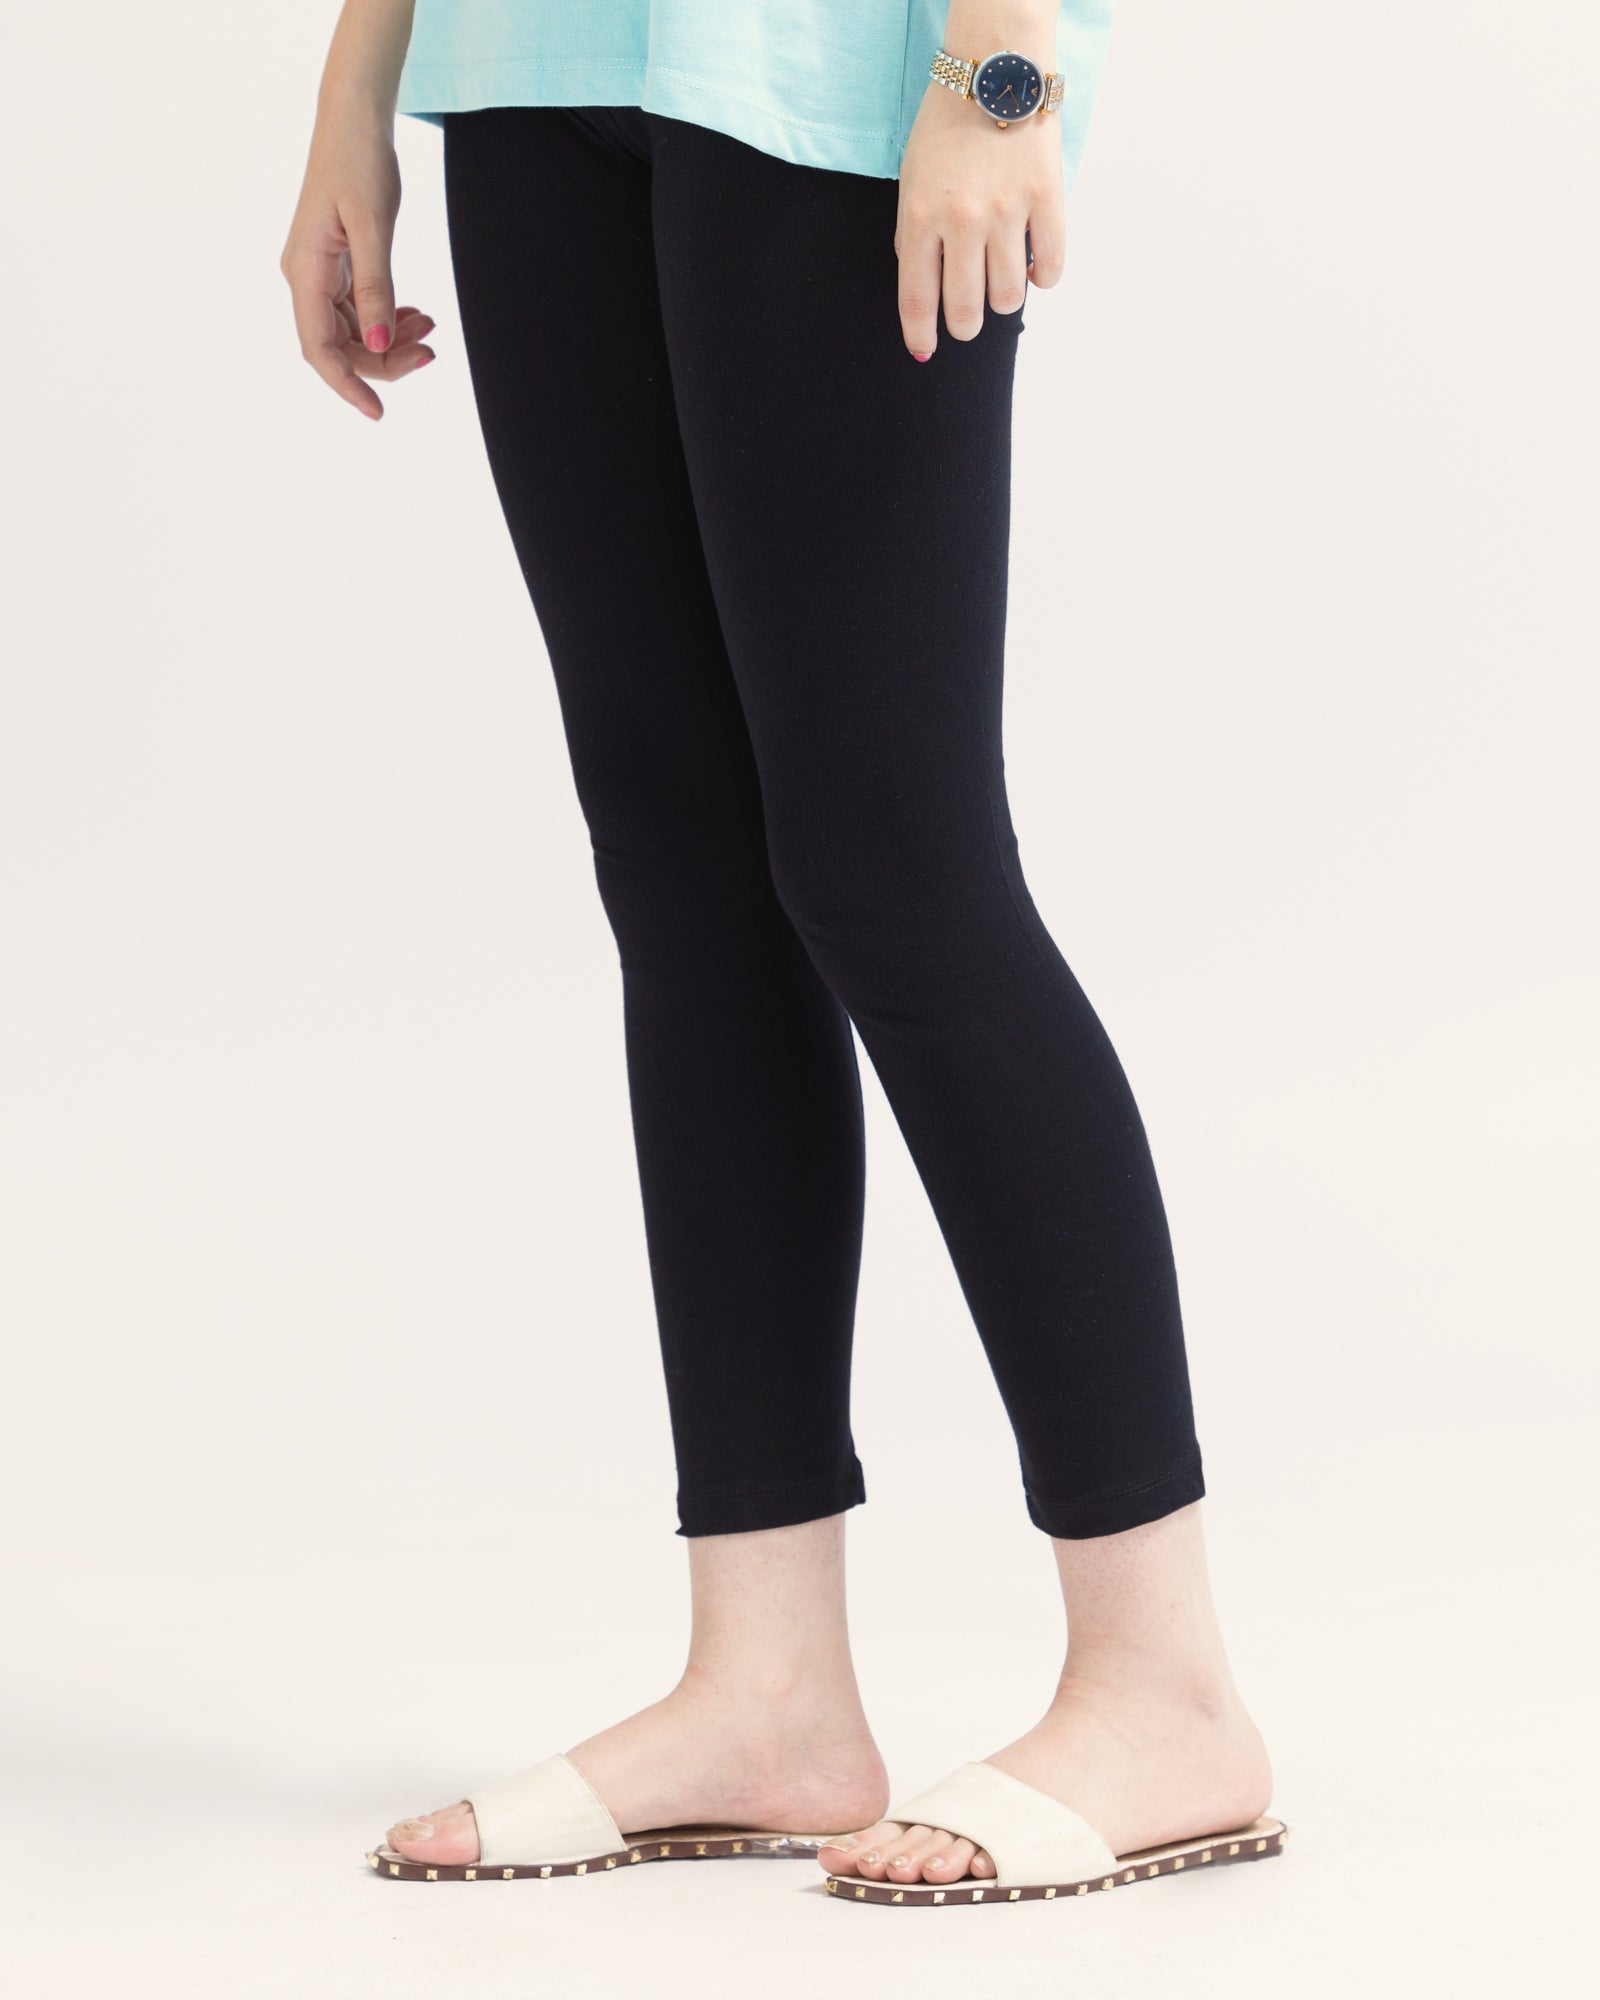 Tights For WOMEN - ENGINE